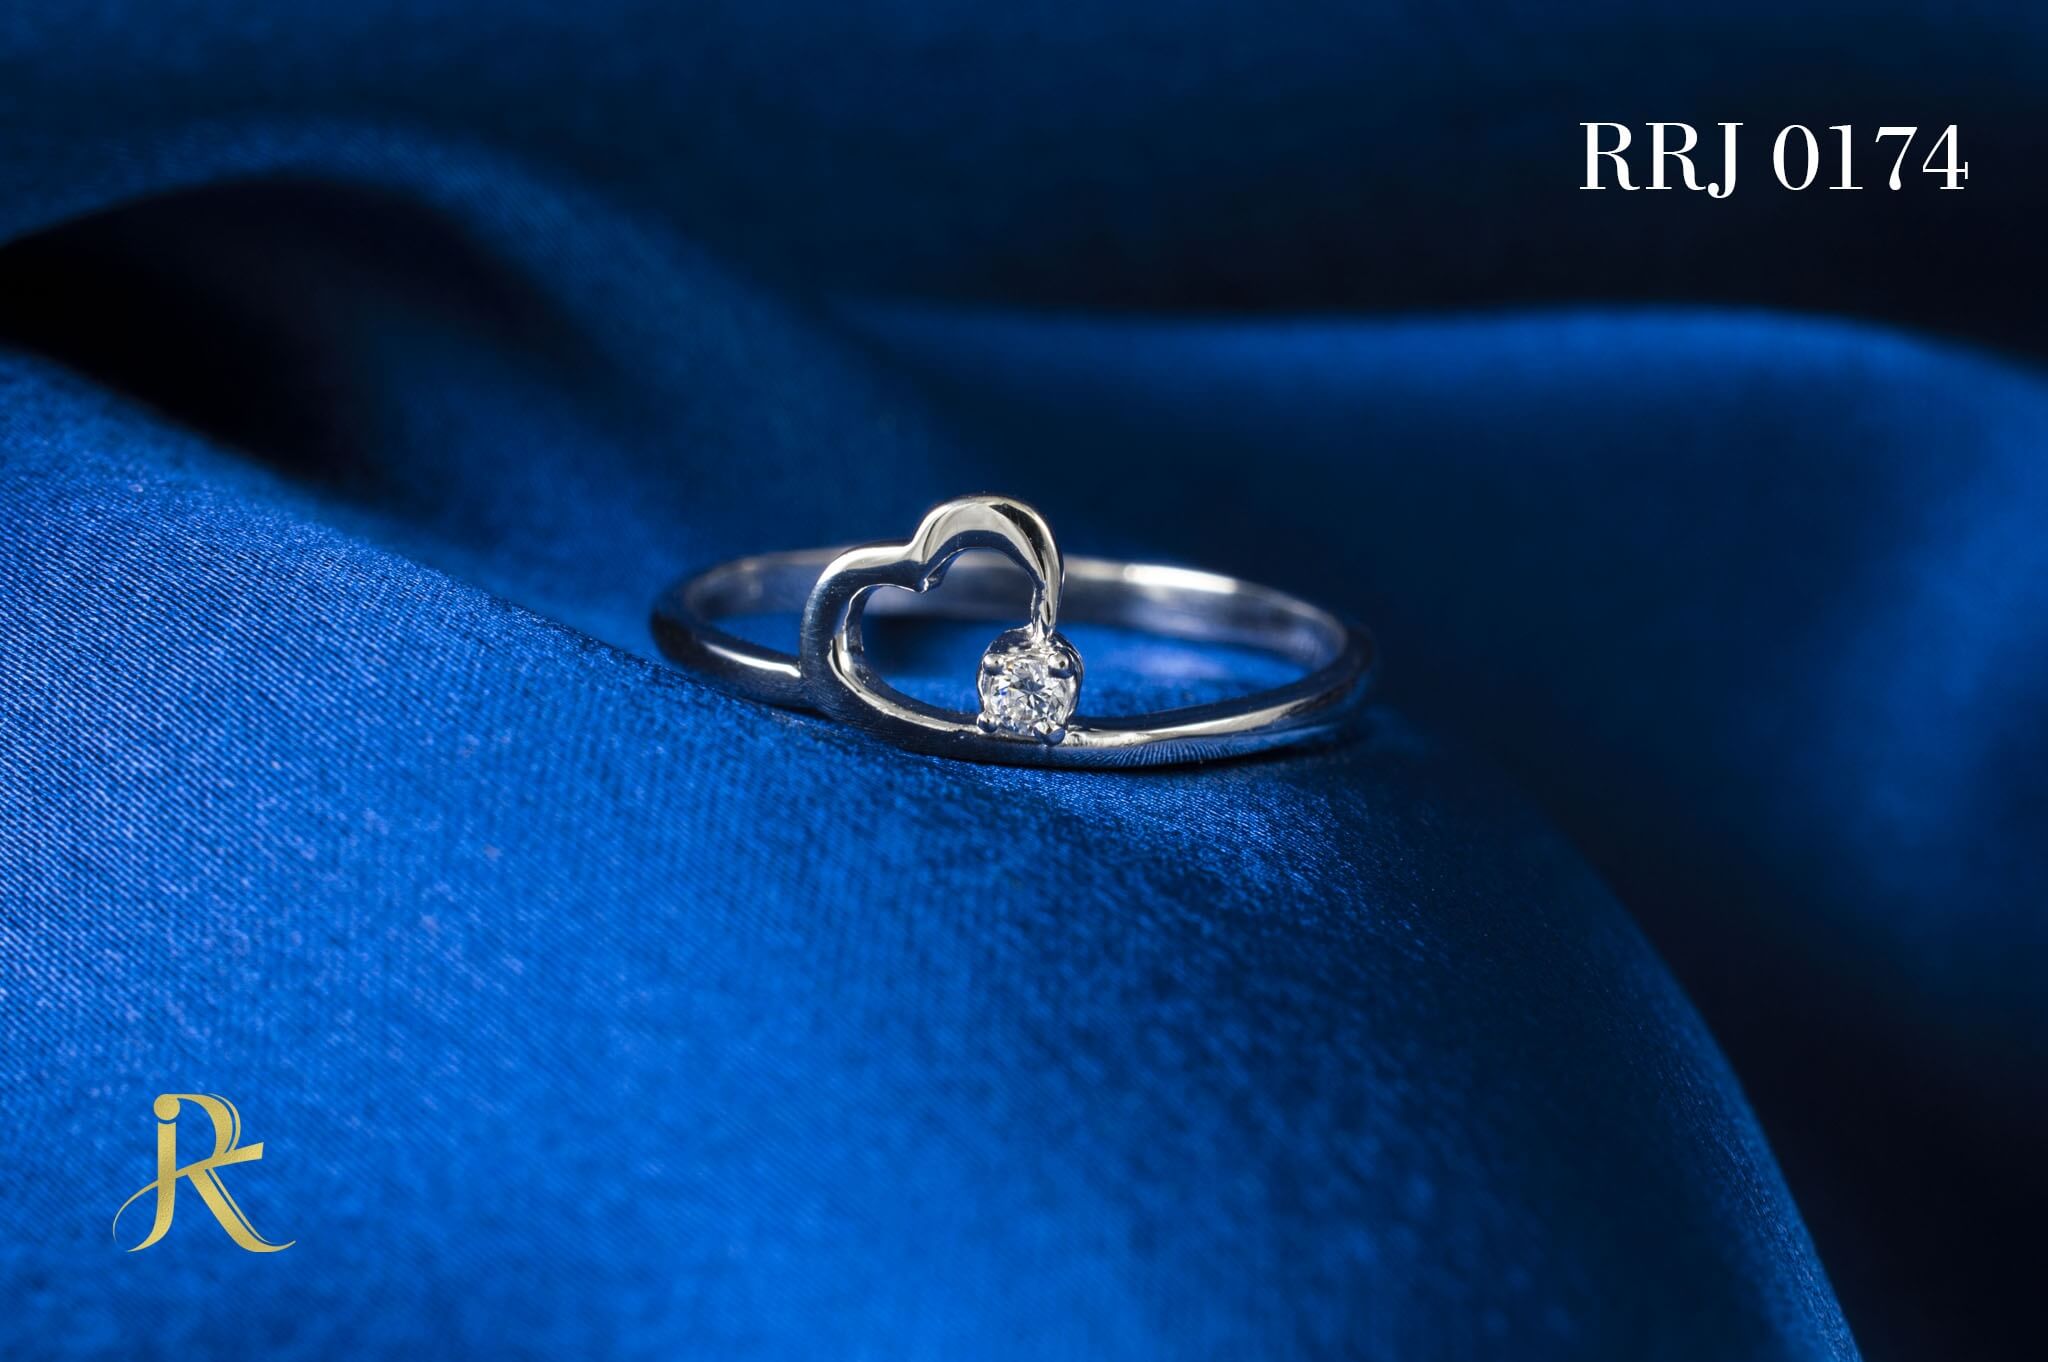 RRJ0174 Pure 925 Sterling Silver Ring